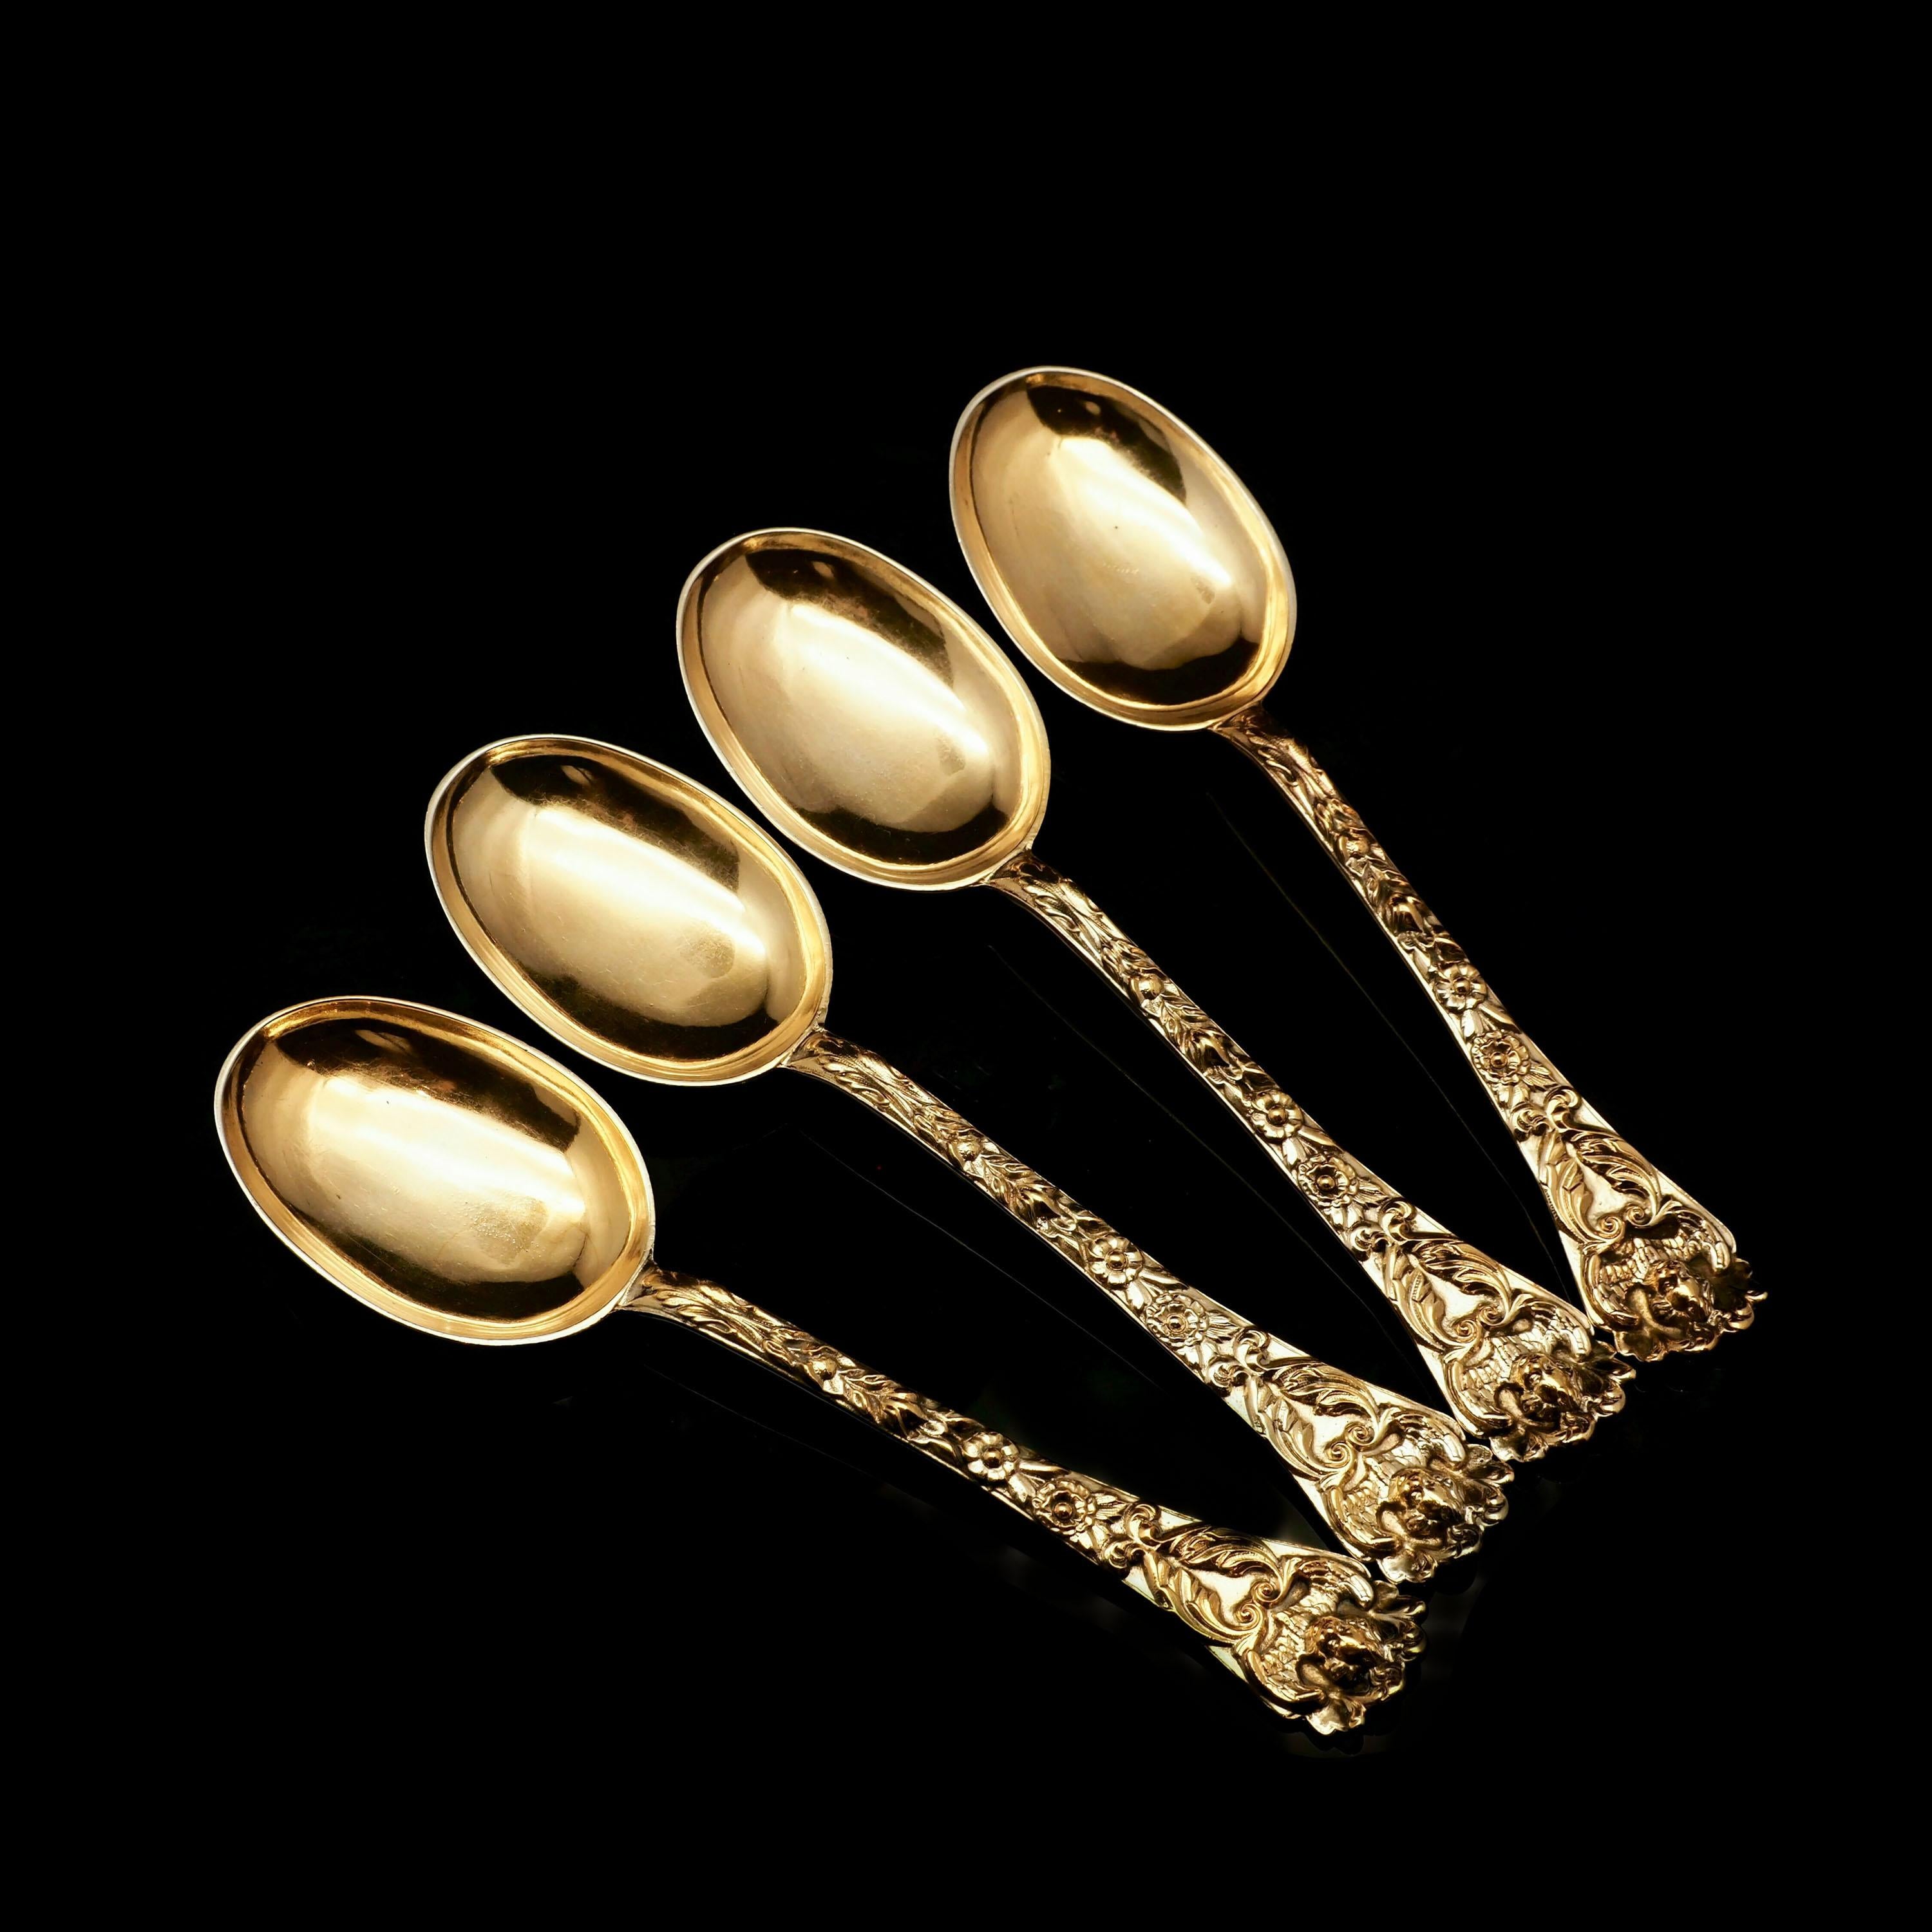 We are delighted to offer this magnificent set of four solid silver gilt spoons made by silversmith Henry William Curry in London, 1871.
 
All four spoons feature an excellent fully gilt (gold on solid silver) colour which remains in very good